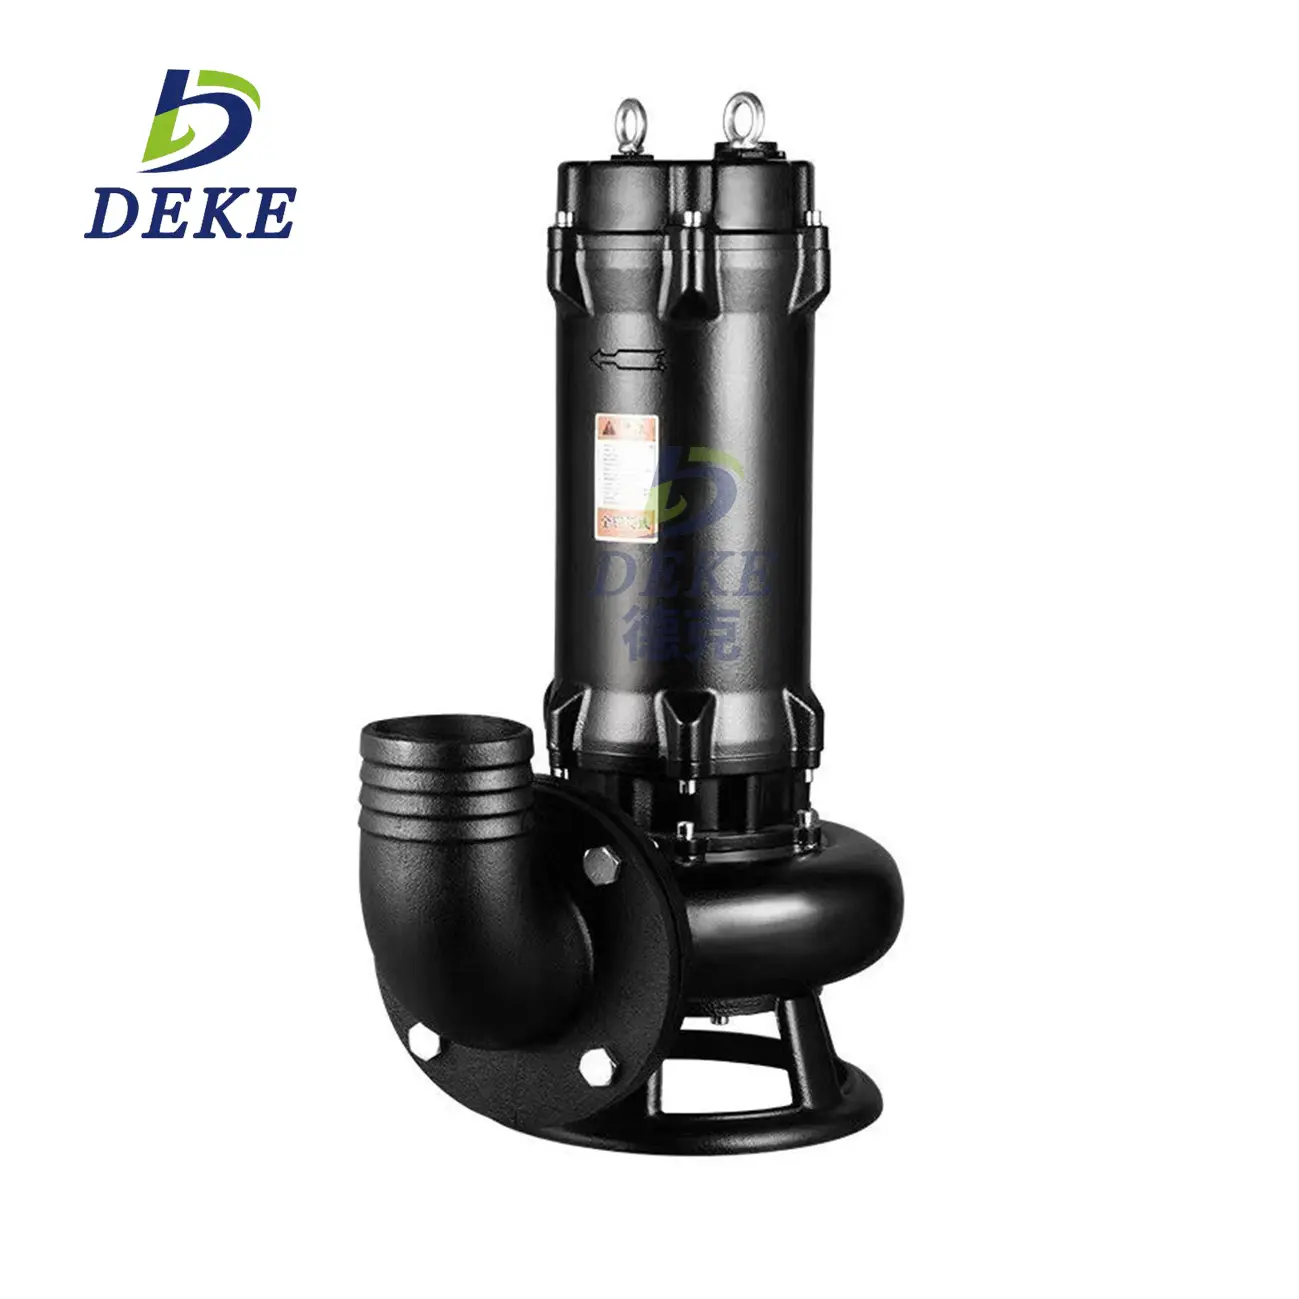 Efficient Electric Auto Stainless Steel Mini Garden Water Sewage Centrifugal Submersible Pump